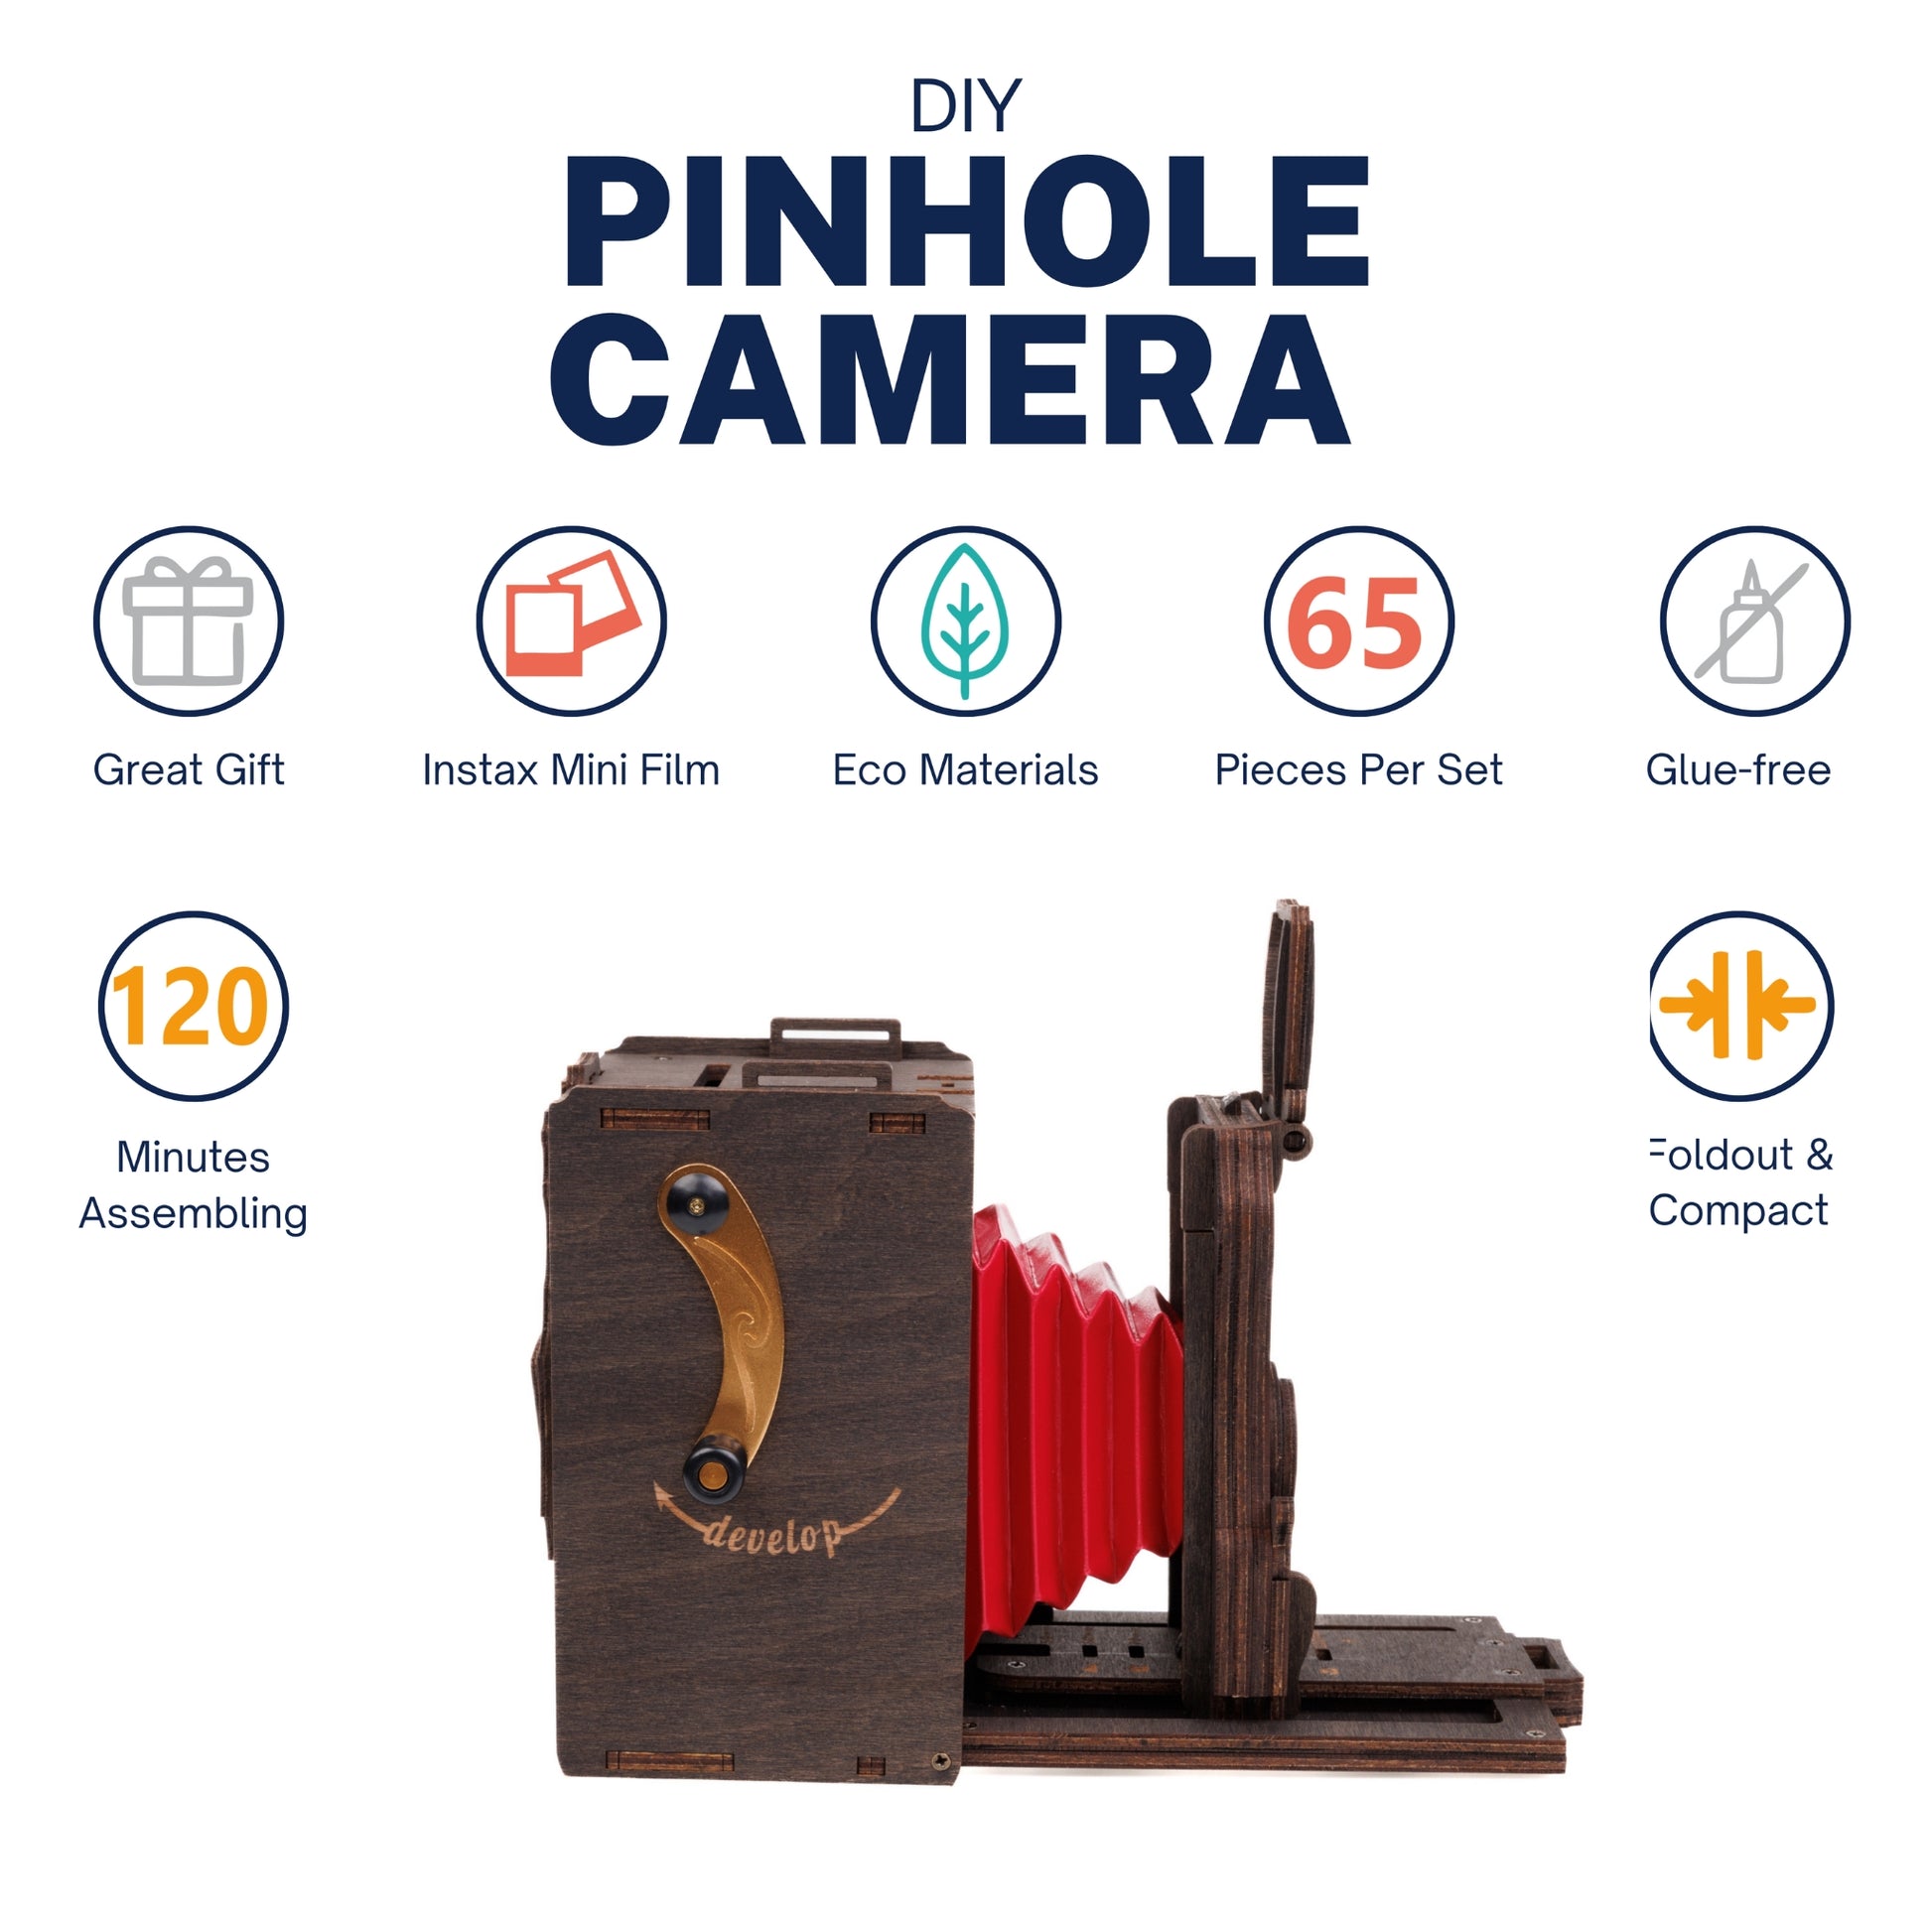 A photo with the profile view of the pre-assembled Pinhole Instant Mini Film Camera in Stained Brown option, with the advantages and features, highlighting various attributes such as: 'Eco-Materials', 'Glue Free', 'Great Gift', 'Vintage Style', '120 Minutes Assembling', '65 pieces per set', 'Instax Mini Film ready' and 'Foldout and Compact'.